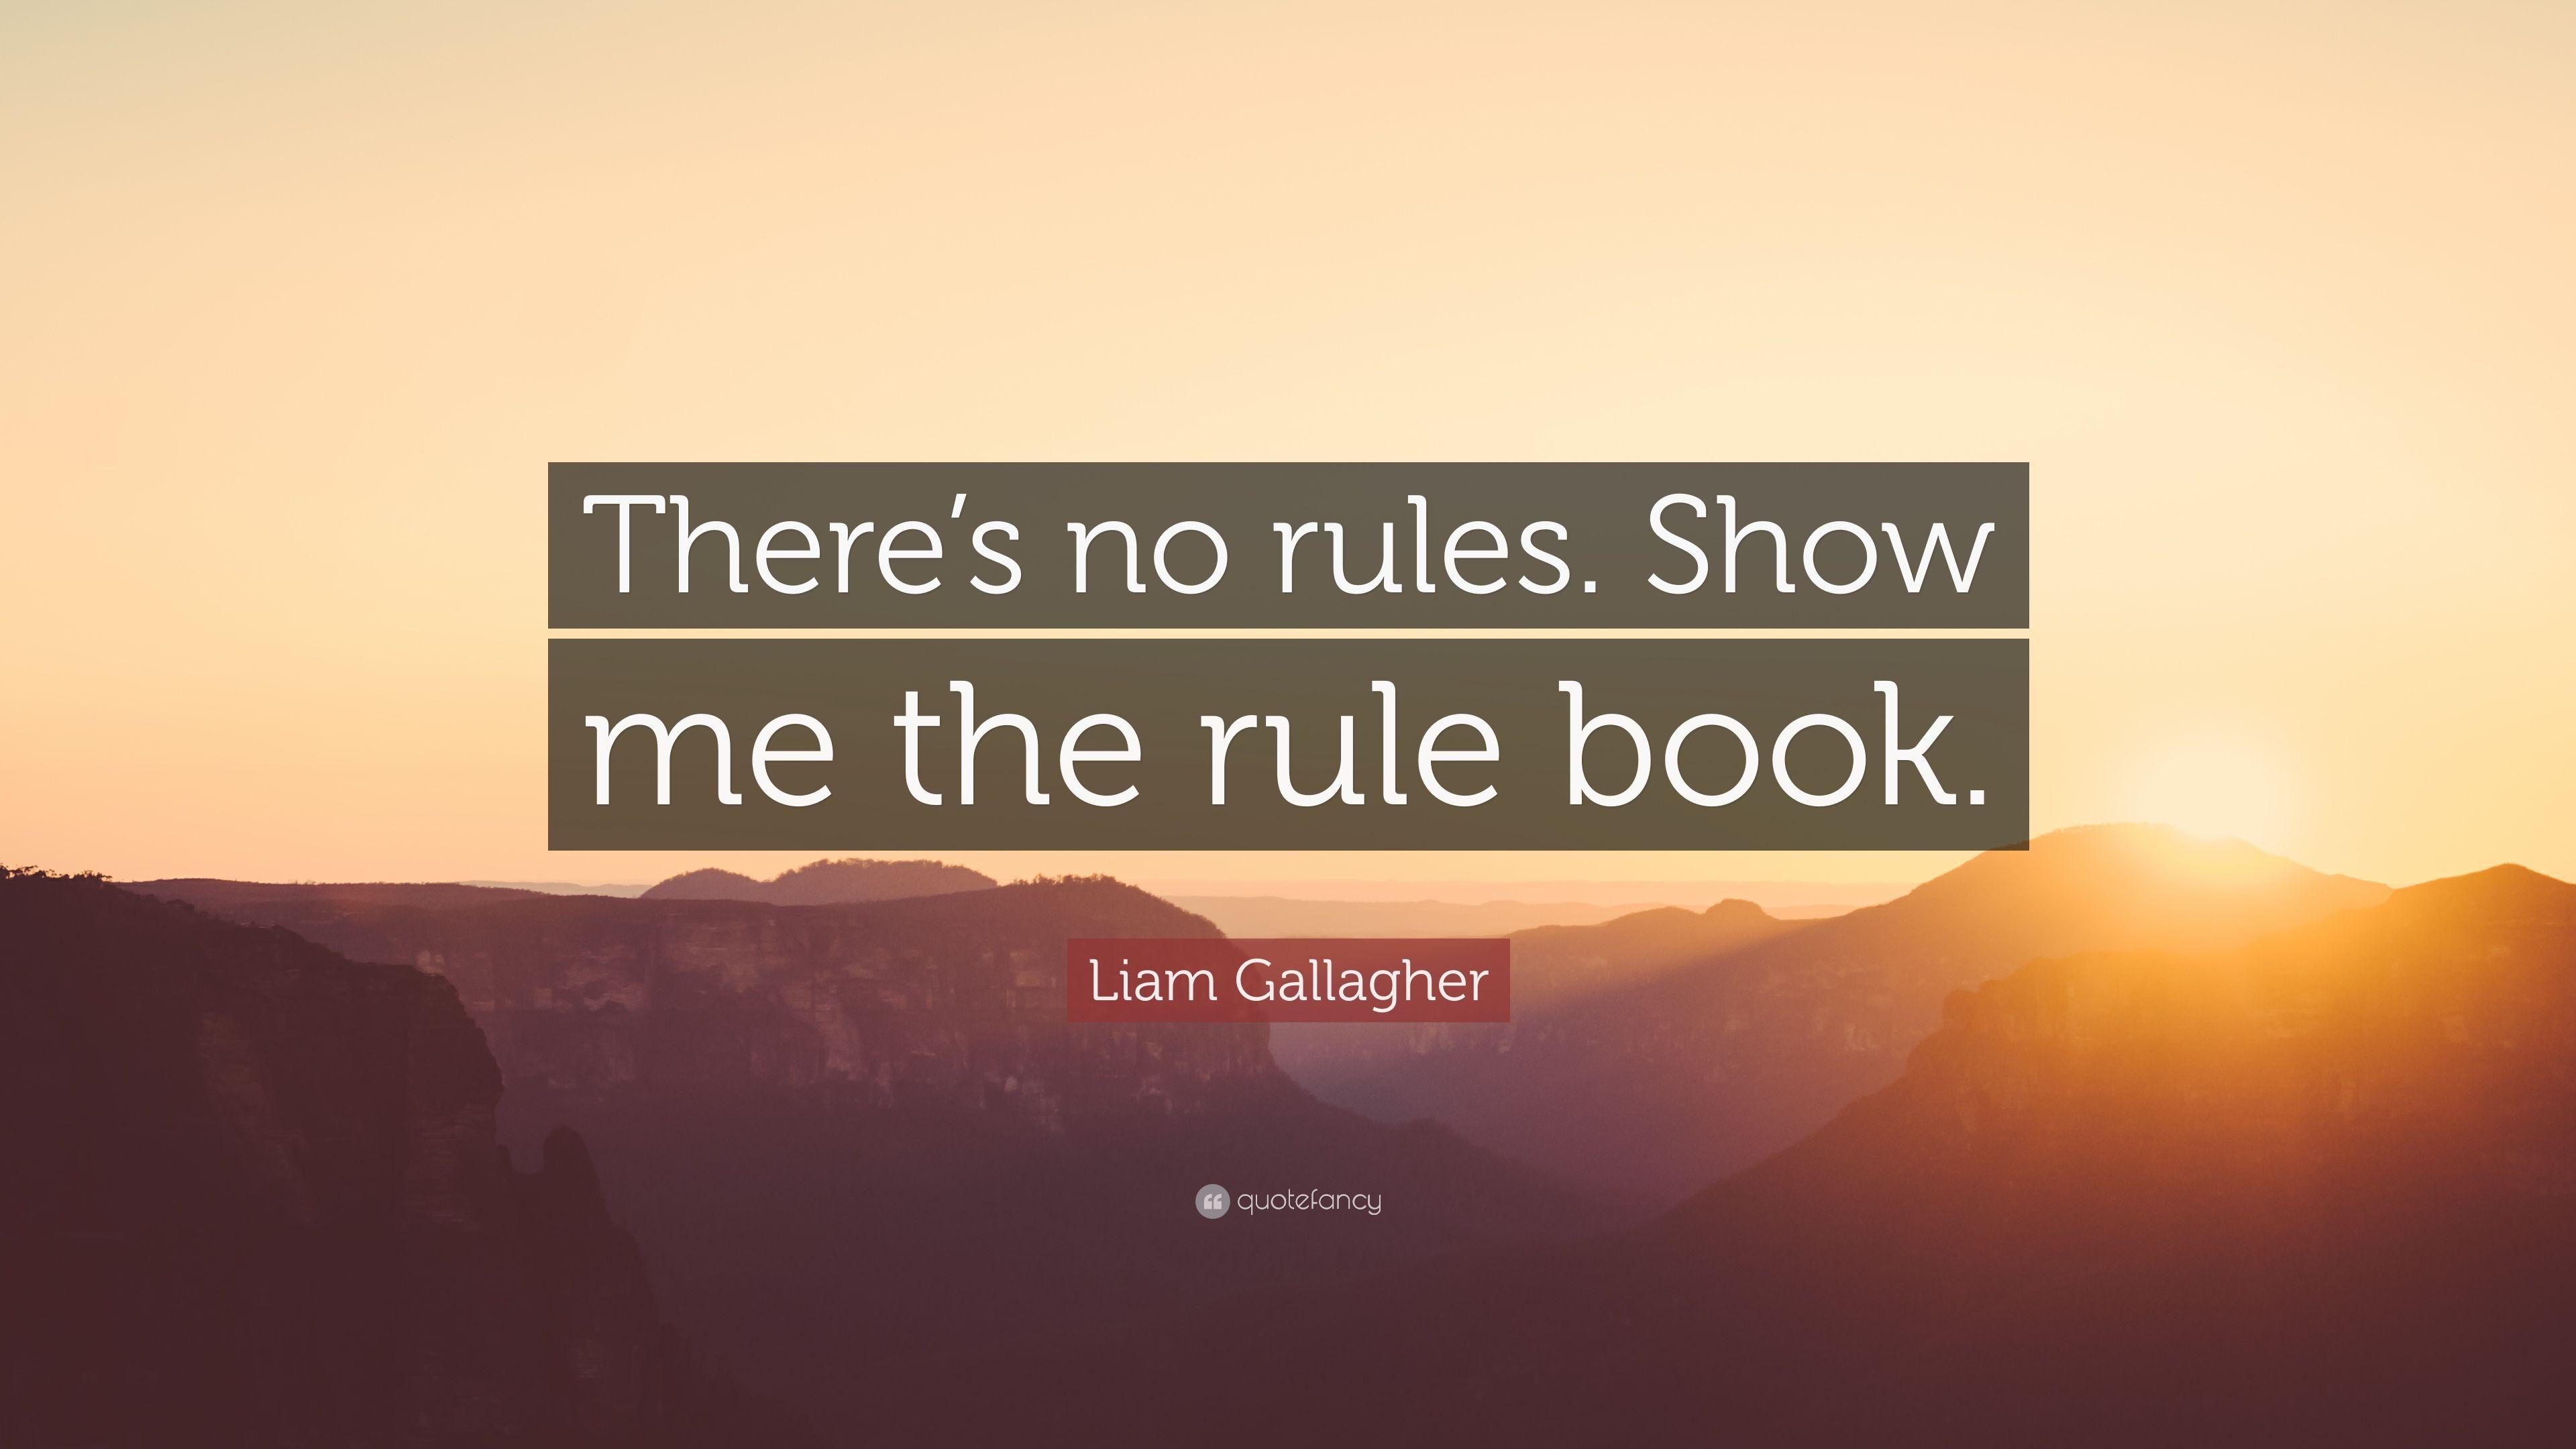 Liam Gallagher Quote: “There's no rules. Show me the rule book